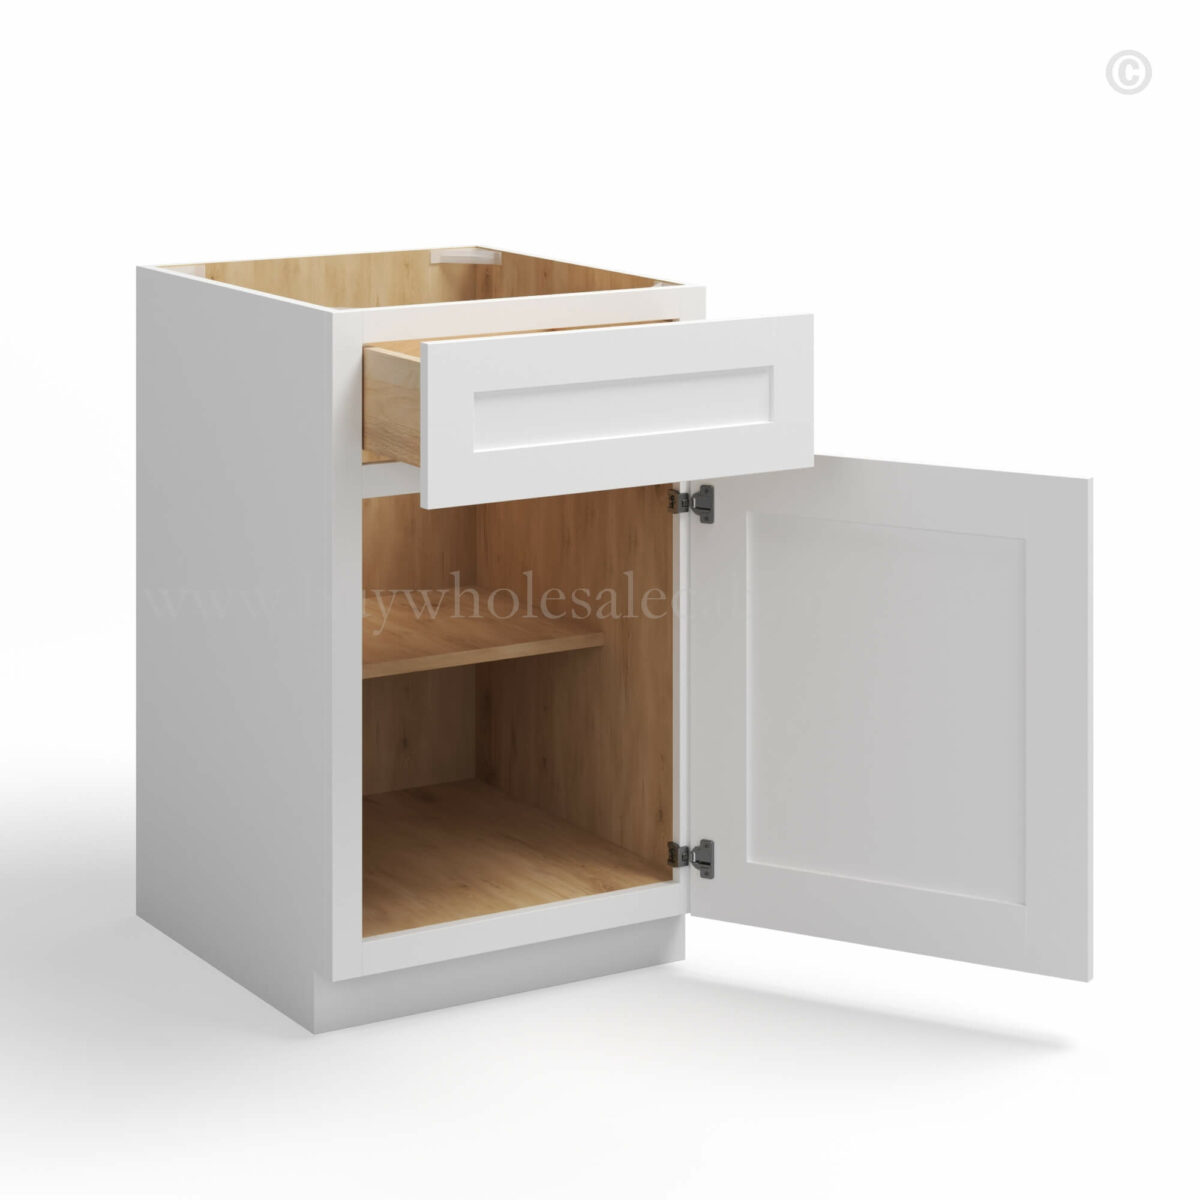 White Shaker Base Cabinet with Single Door & Drawer